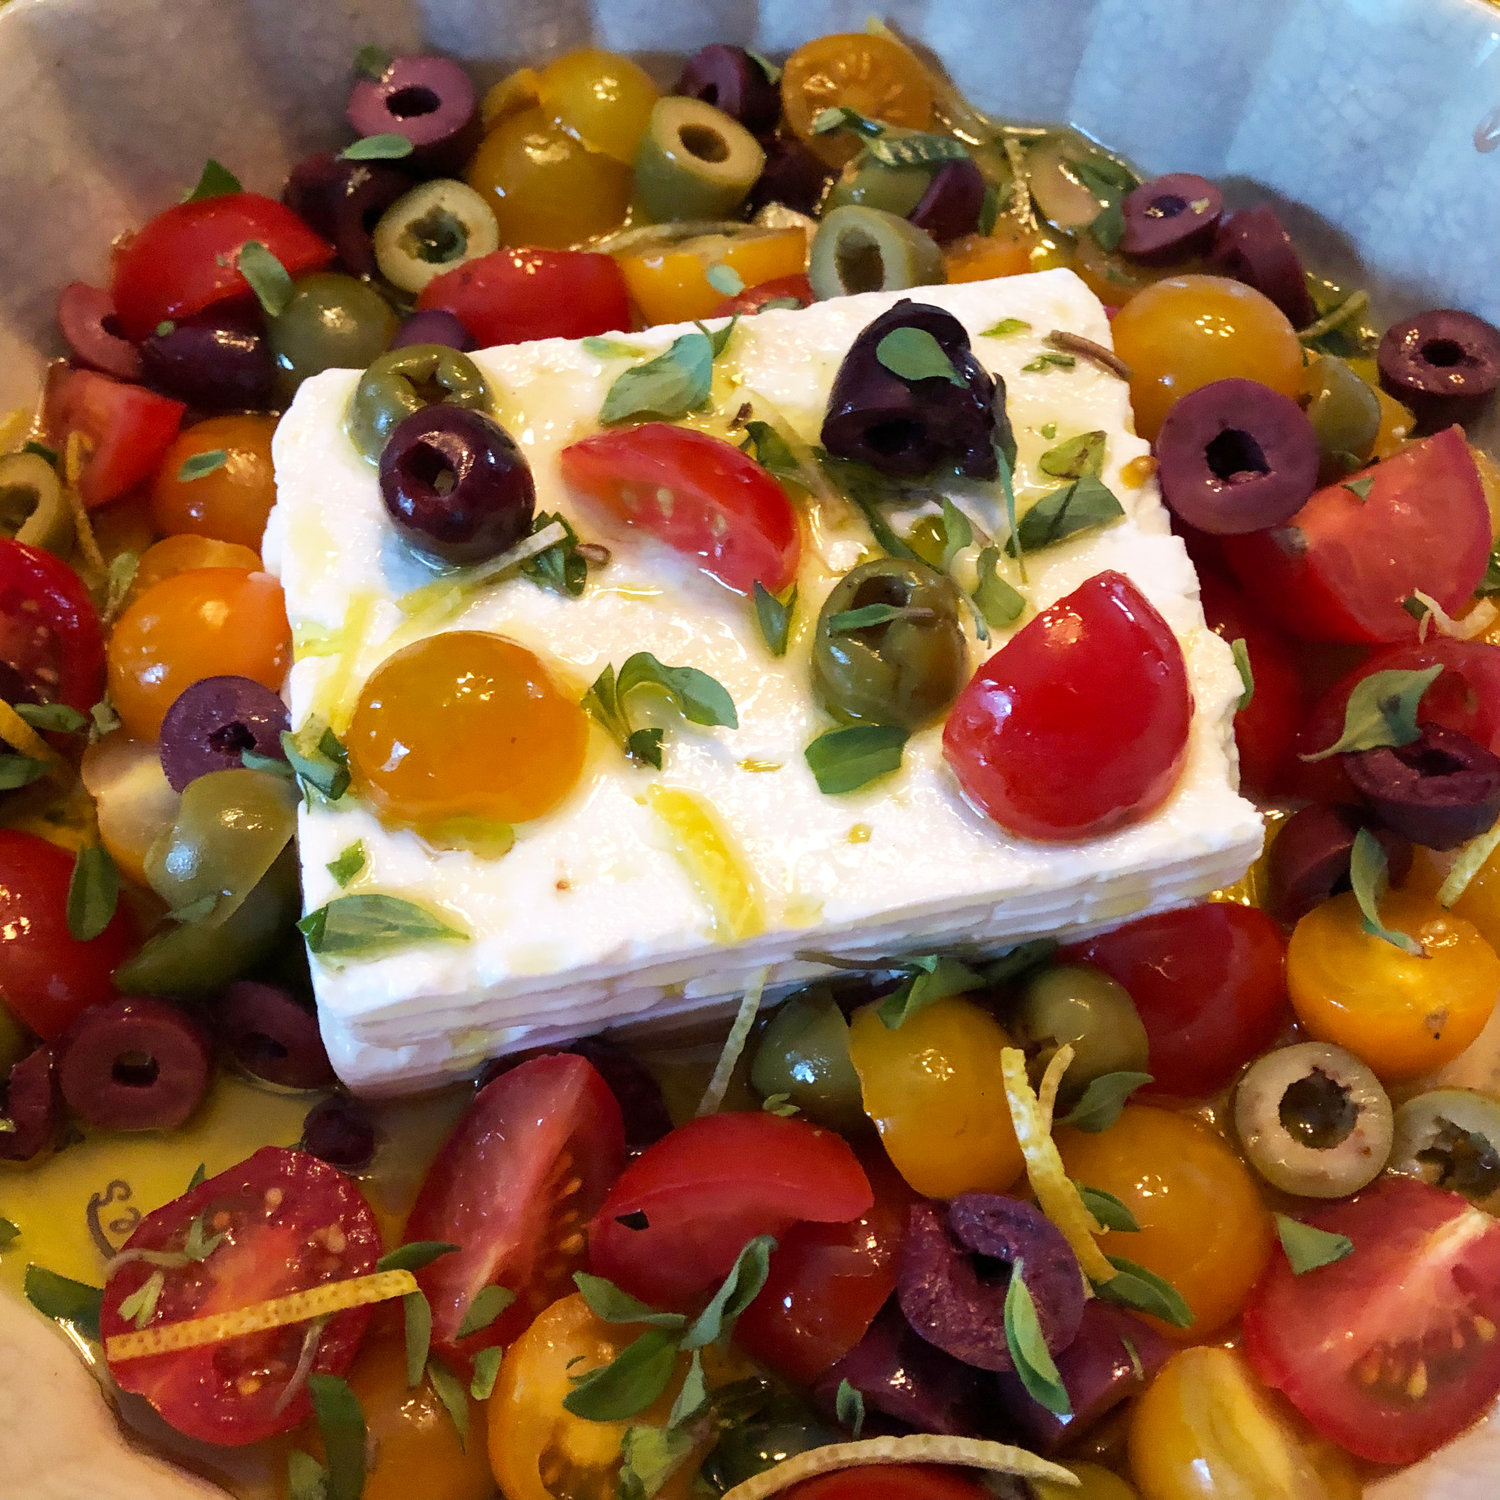 Warm Greek Feta Dip prior to baking. The snow-white slab of Feta is surrounded by olives and grape tomatoes.